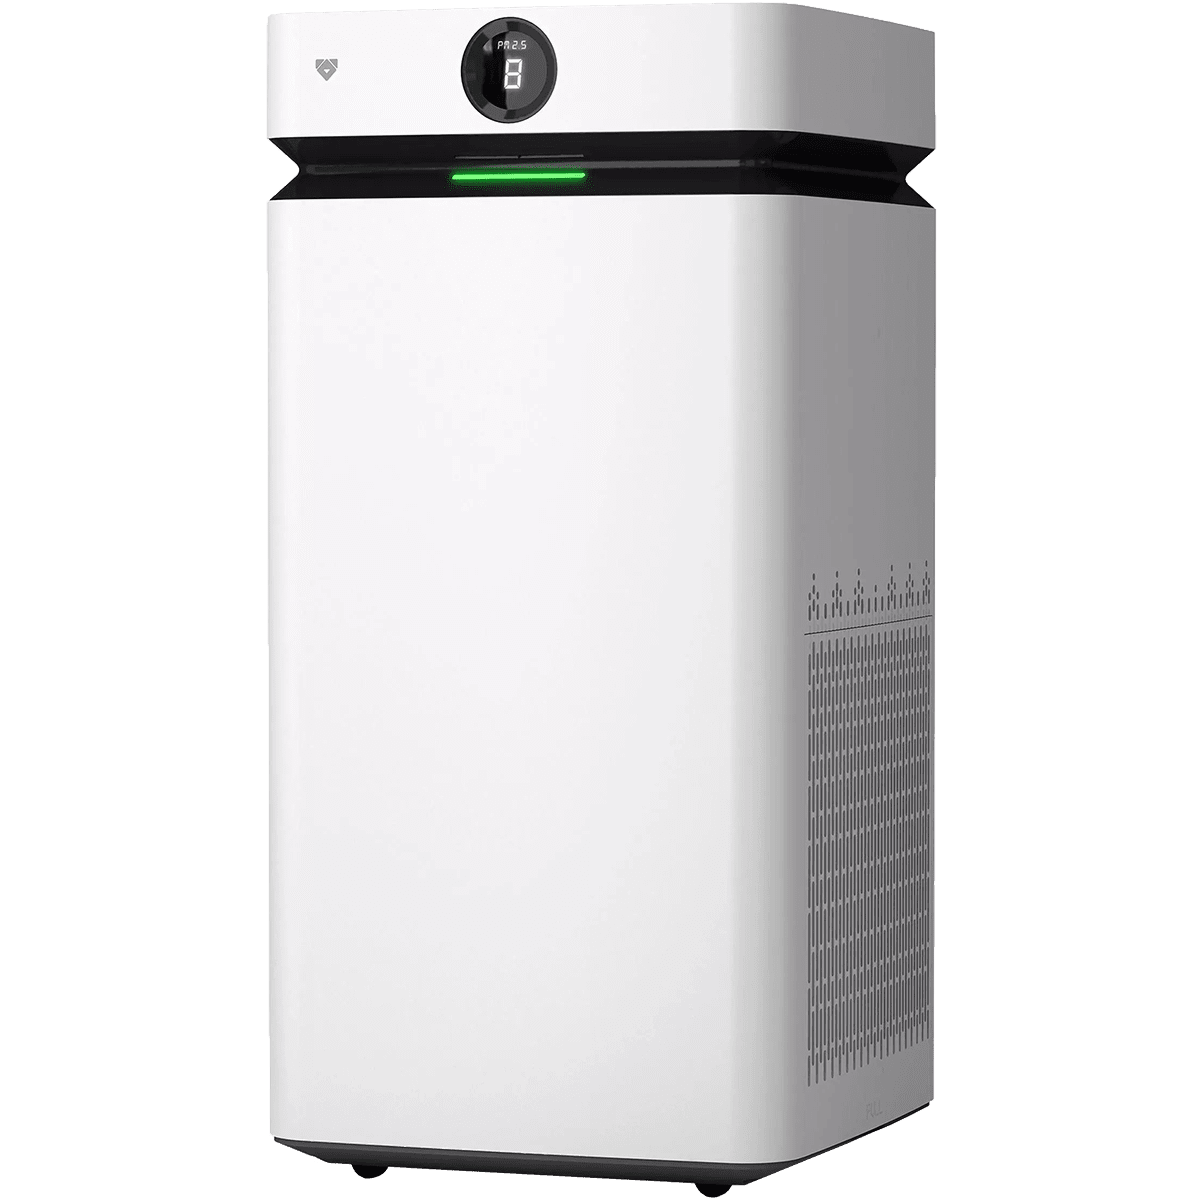 Airdog X8 Air Purifier: Trusted Review & Specs In 2023